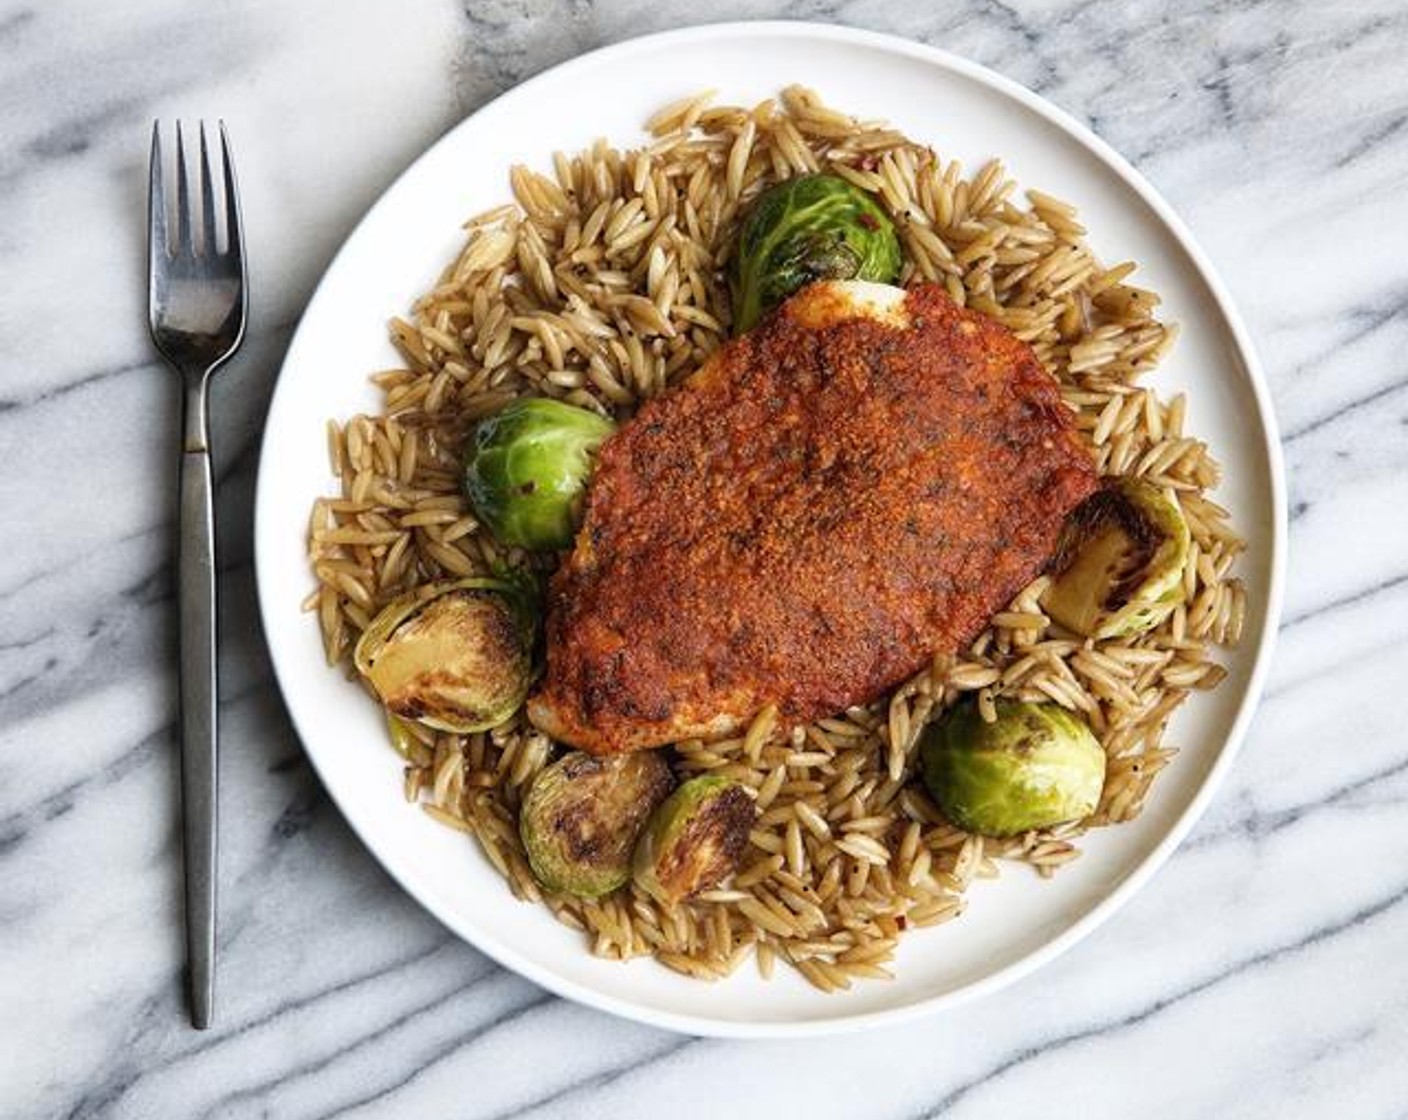 Parmesan Crusted Tilapia with Orzo and Sprouts